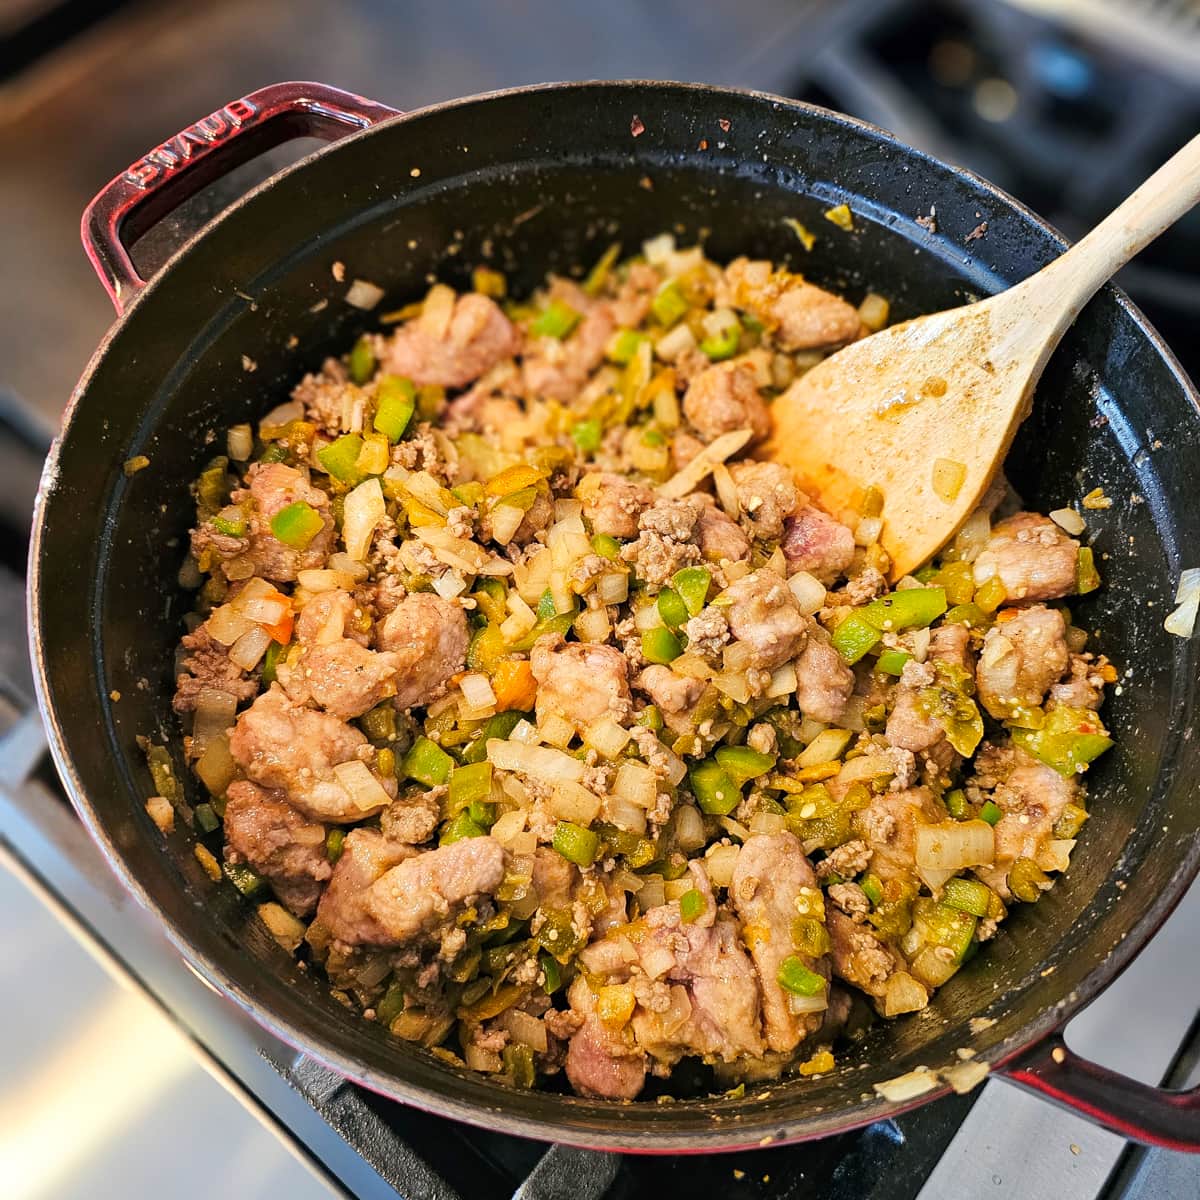 Pork chili verde cooking in a Dutch oven on a stovetop.